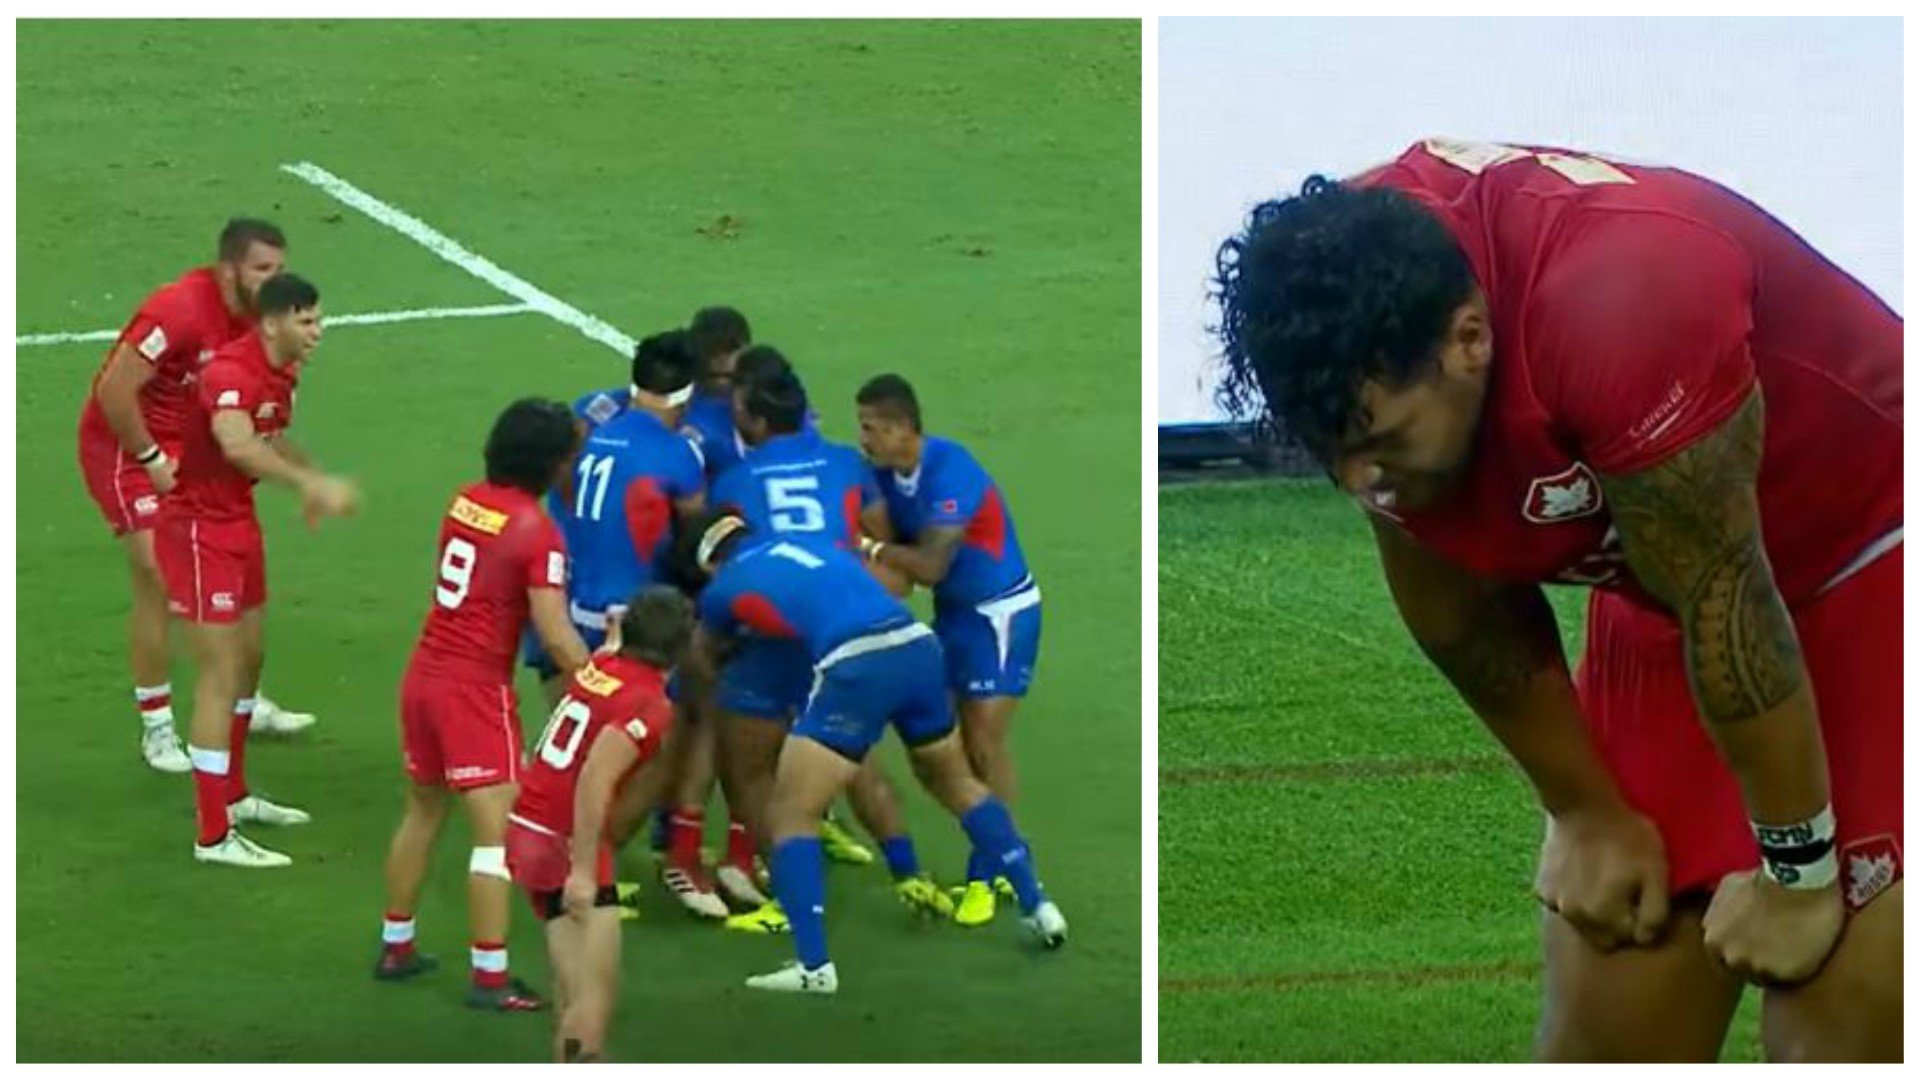 SHOCKING: Chaos in Singapore as Samoa treat Canadian 'like vagrant punter' with 7 on 1 tackle